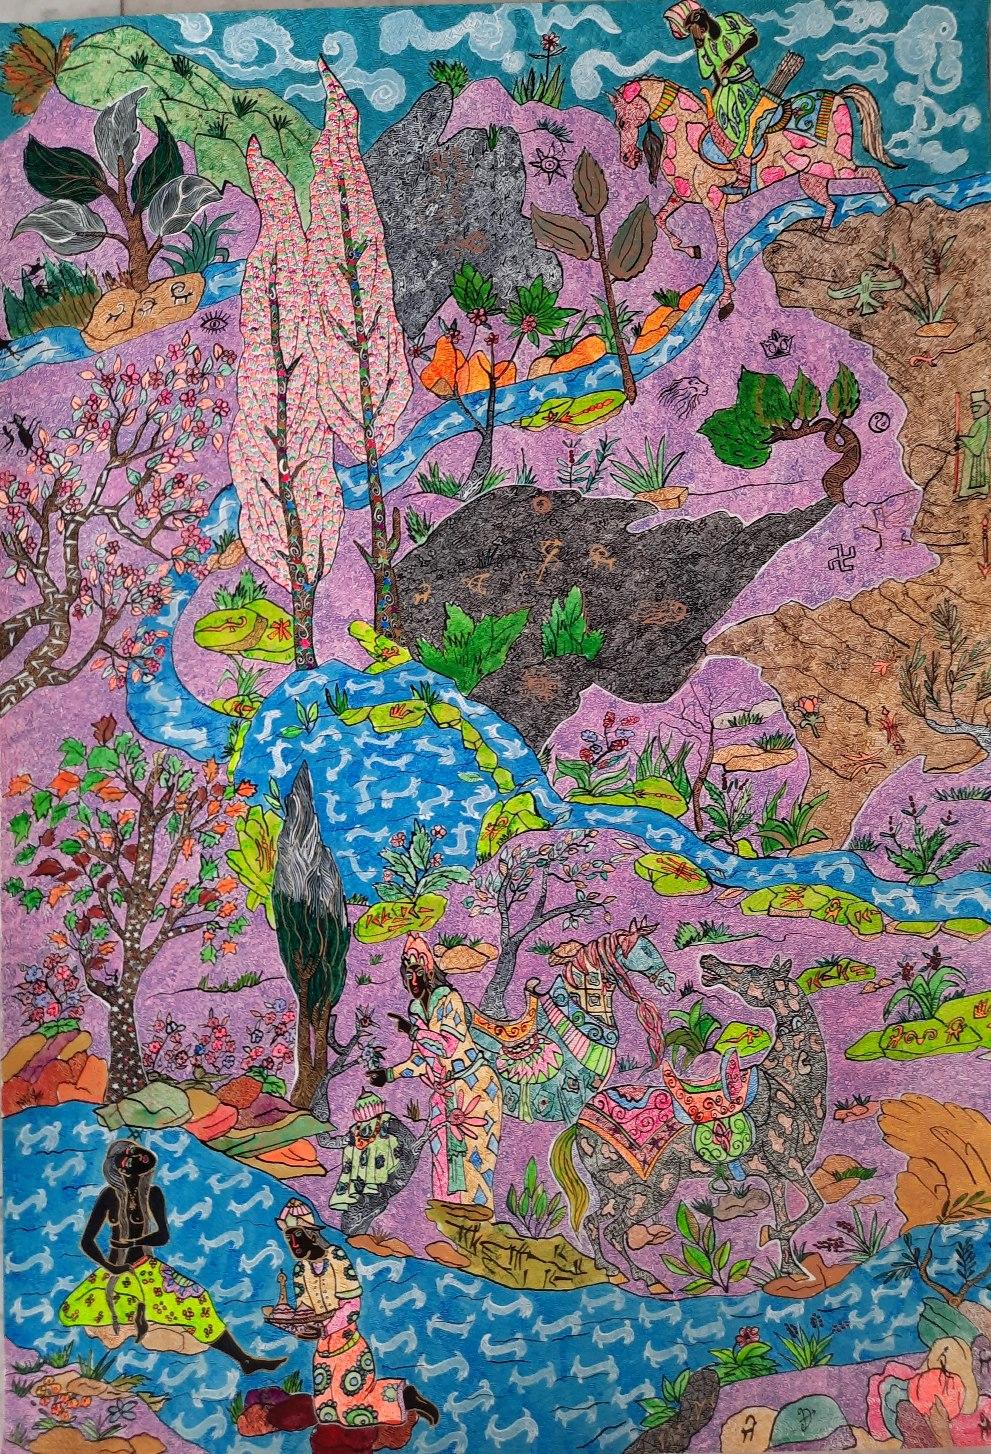 Full title : The first meeting of the Prince and his lover in the forest
Acrylic paint on paper
Hand-signed lower right by the artist

THE THOUSAND AND ONE NIGHTS OF MOHAMMAD ARIYAEI

" Gentleness and oriental wisdom follow the supercharged bubbling